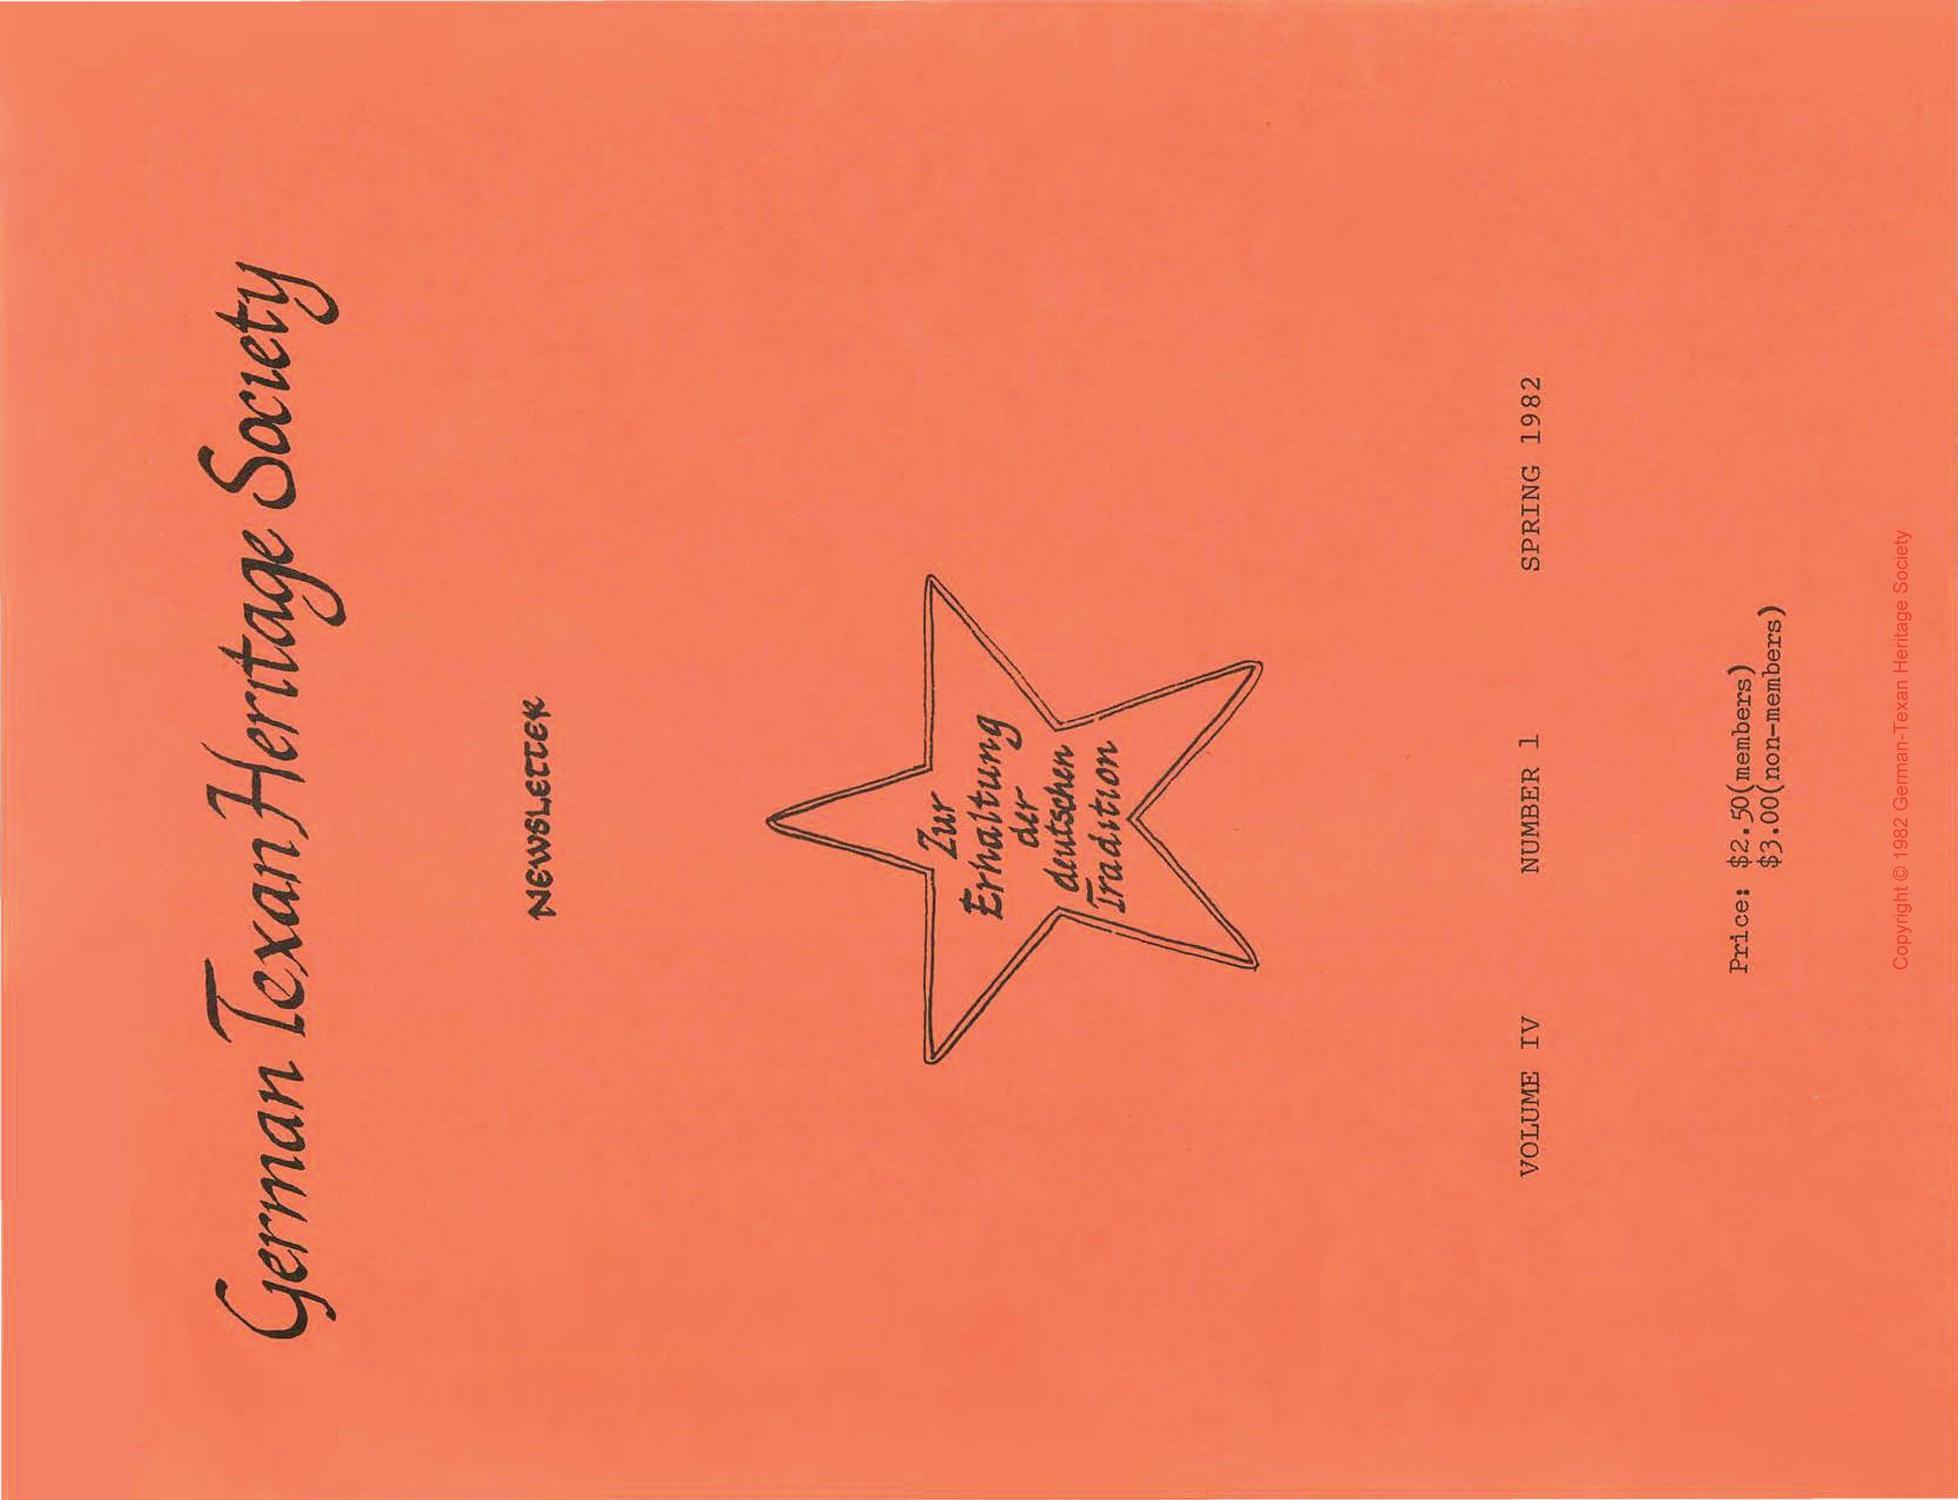 German-Texan Heritage Society Newsletter, Volume 4, Number 1, Spring 1982
                                                
                                                    Front Cover
                                                